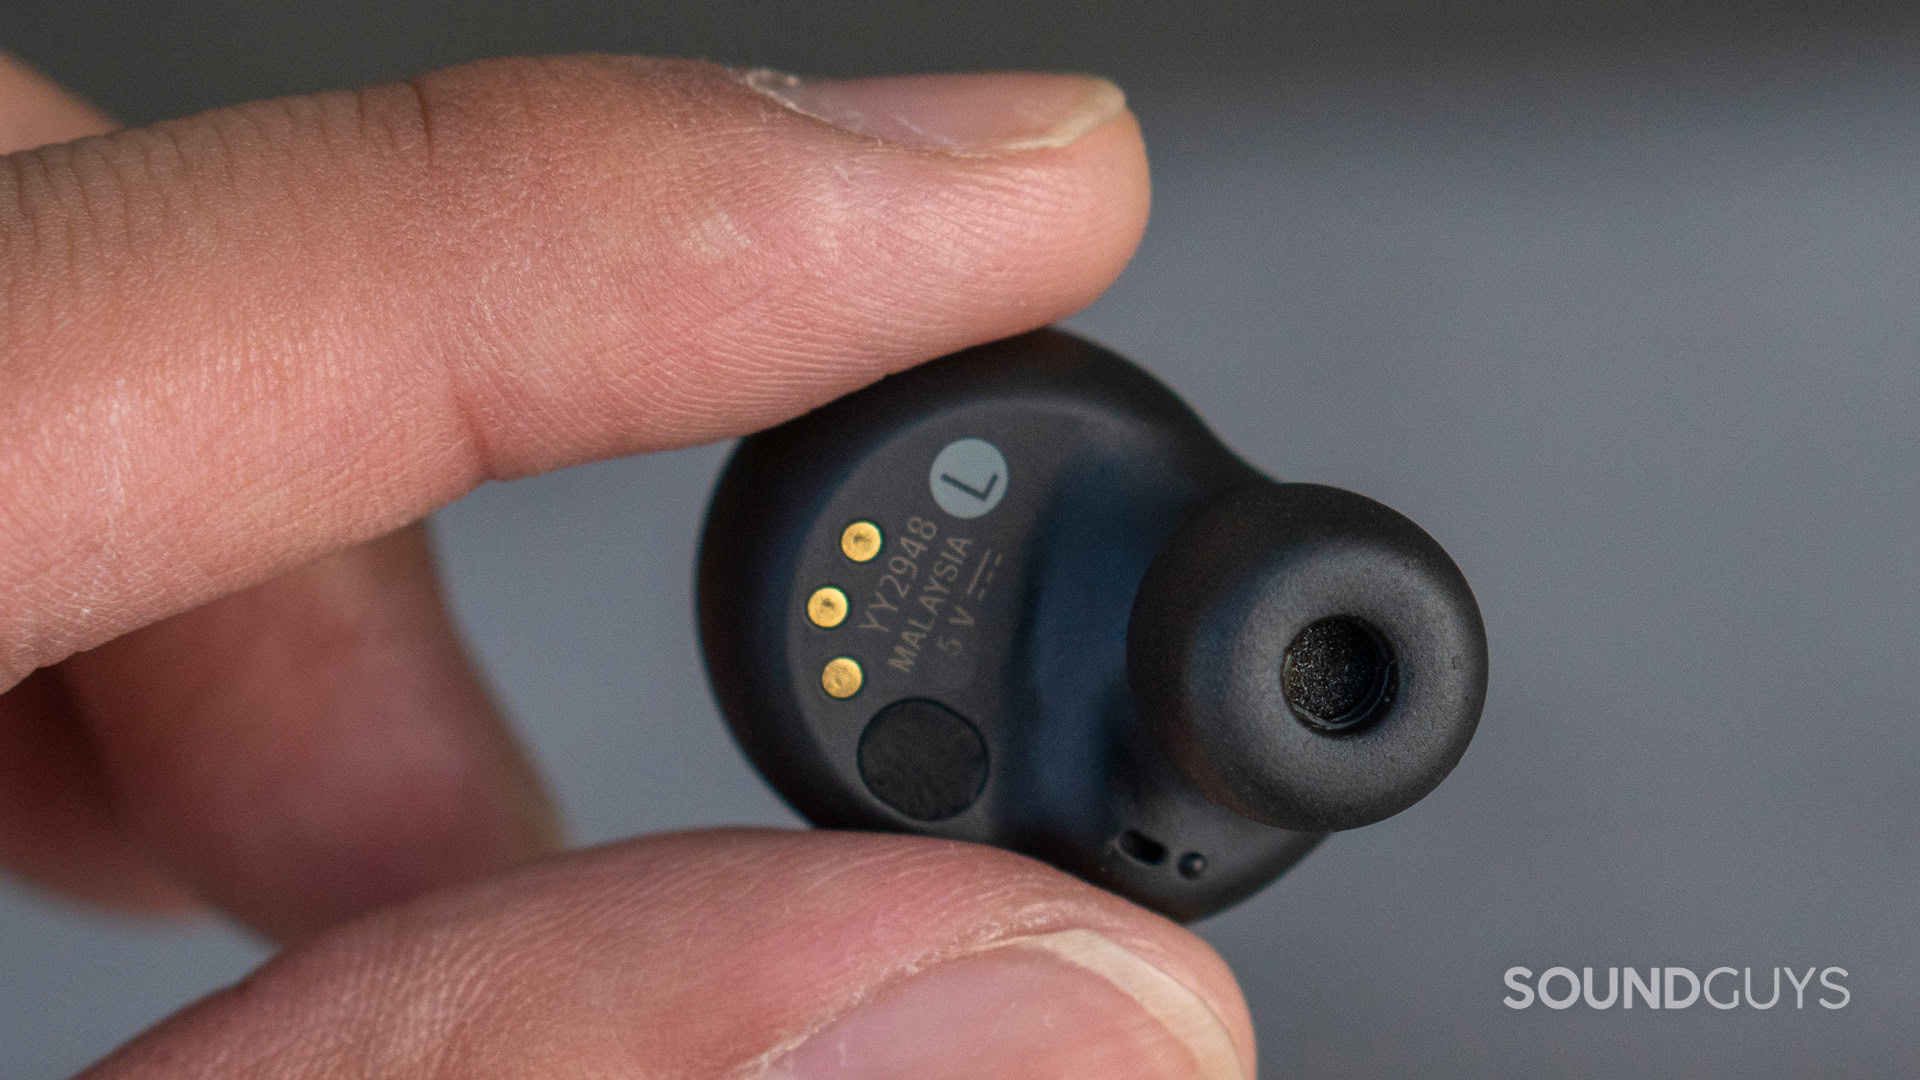 A close-up image of the left Sony WF-1000XM4 earbud and ear tip.